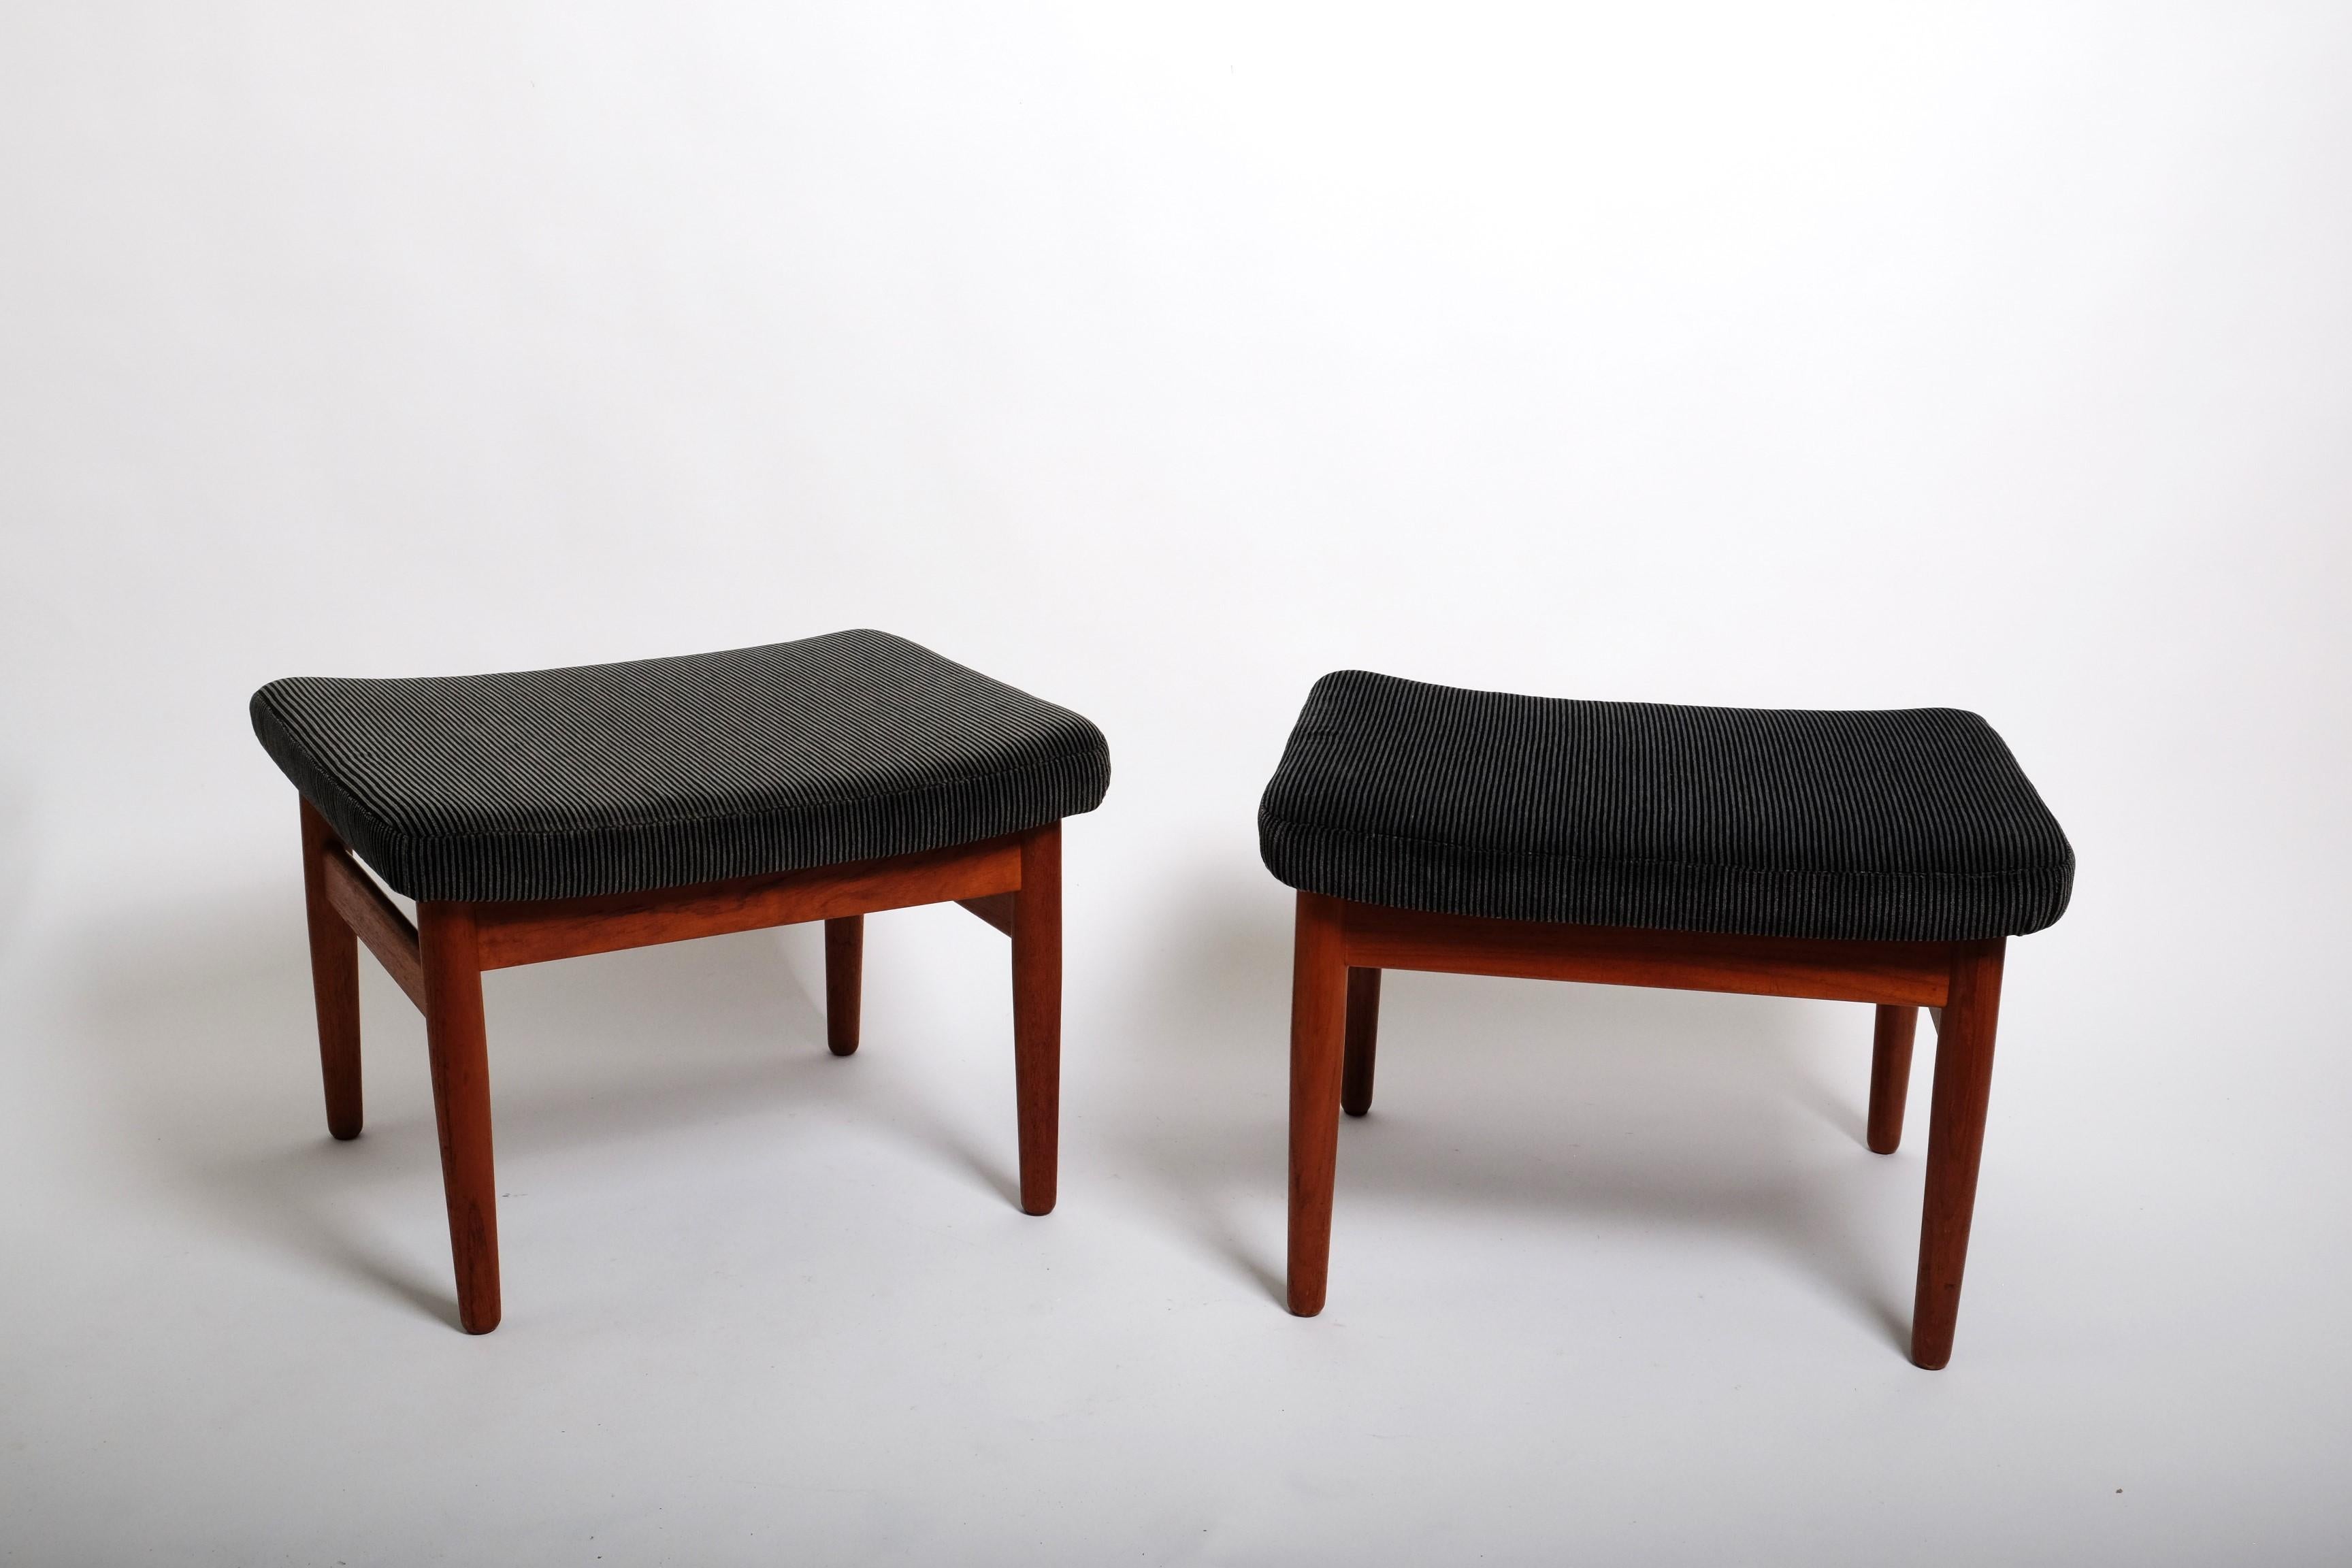 Two very nice stools designed by Arne Vodder for France & Son, Denmark 1962. They were originally designed as ottomans of the FD164 adjustable armchair. But they can also be used as standalone stools. 

These stools are made of solid teak wood. They